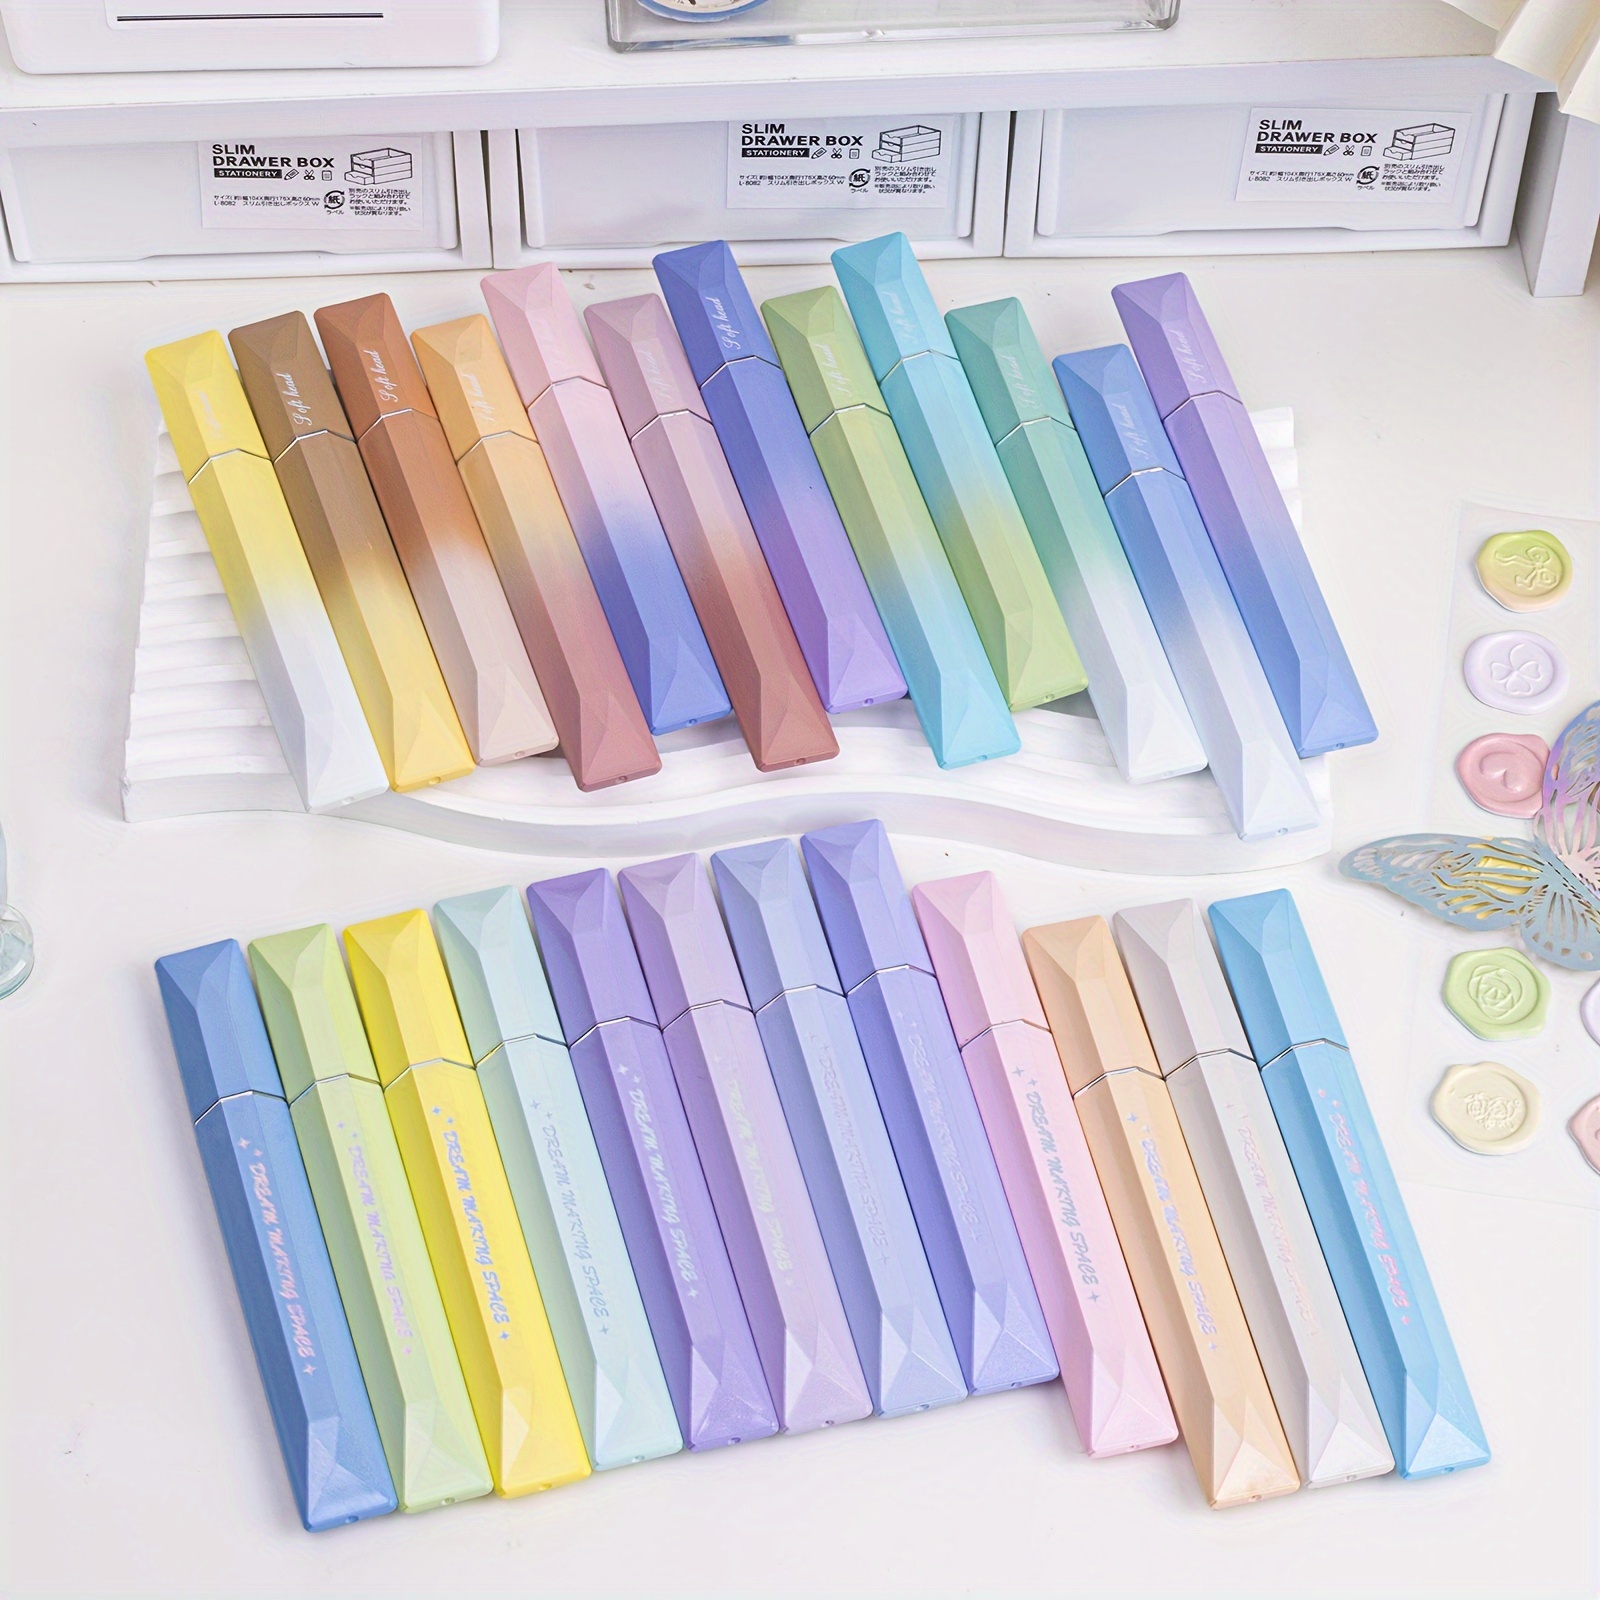 

Glitter Pastel Highlighter, Set Of 24 Pcs Cute Aesthetic Highlighters Assorted Colors, Chisel Tip, Metallic Highlighters For Journal Planner, Highlighting, Note-taking, Glitter Ink Set.